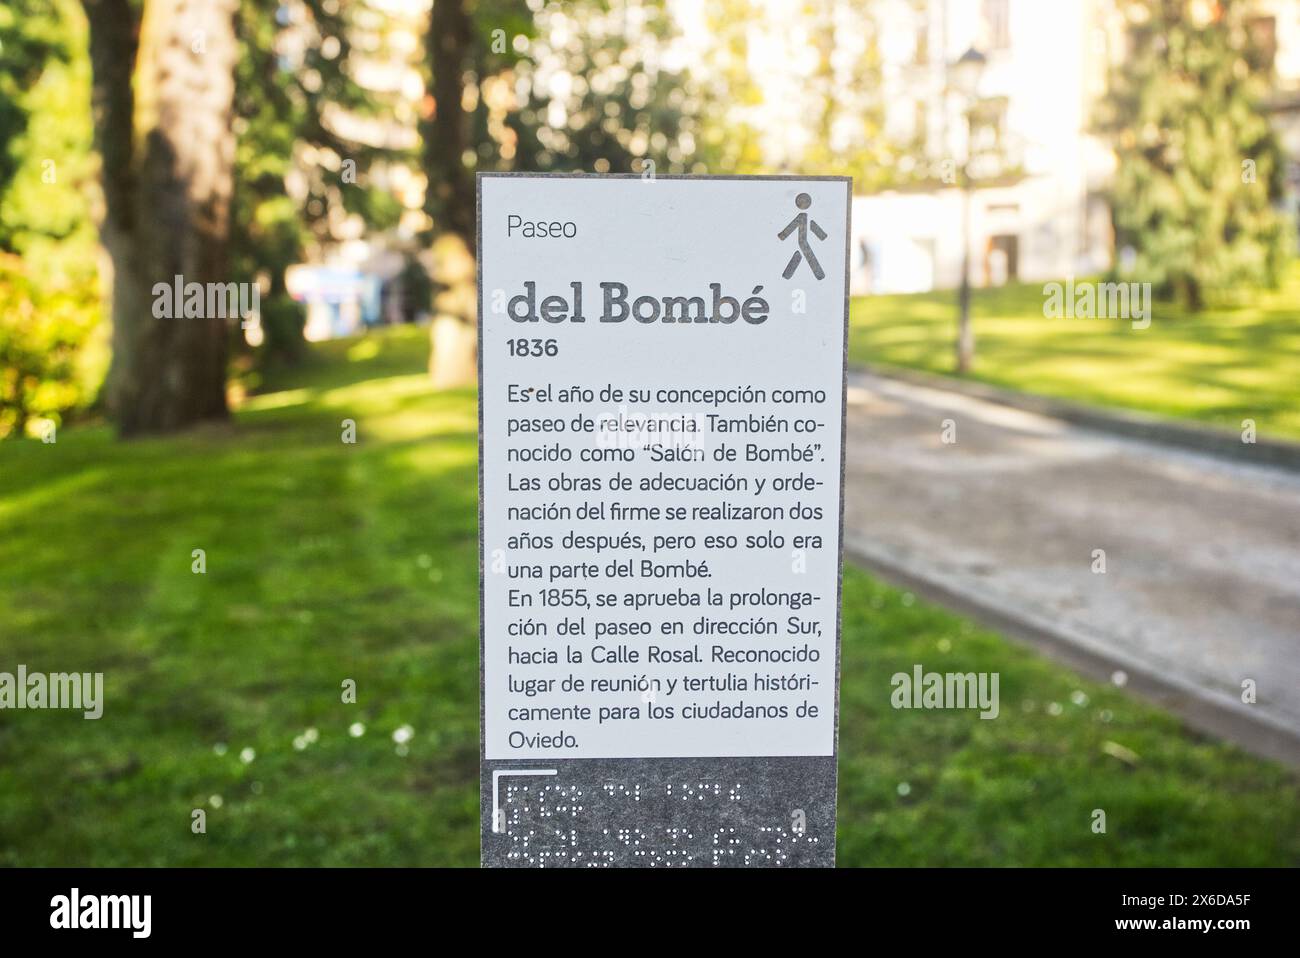 Paseo del Bombé 1836, is located in the San Francisco park in Oviedo, Asturias, Spain. Stock Photo